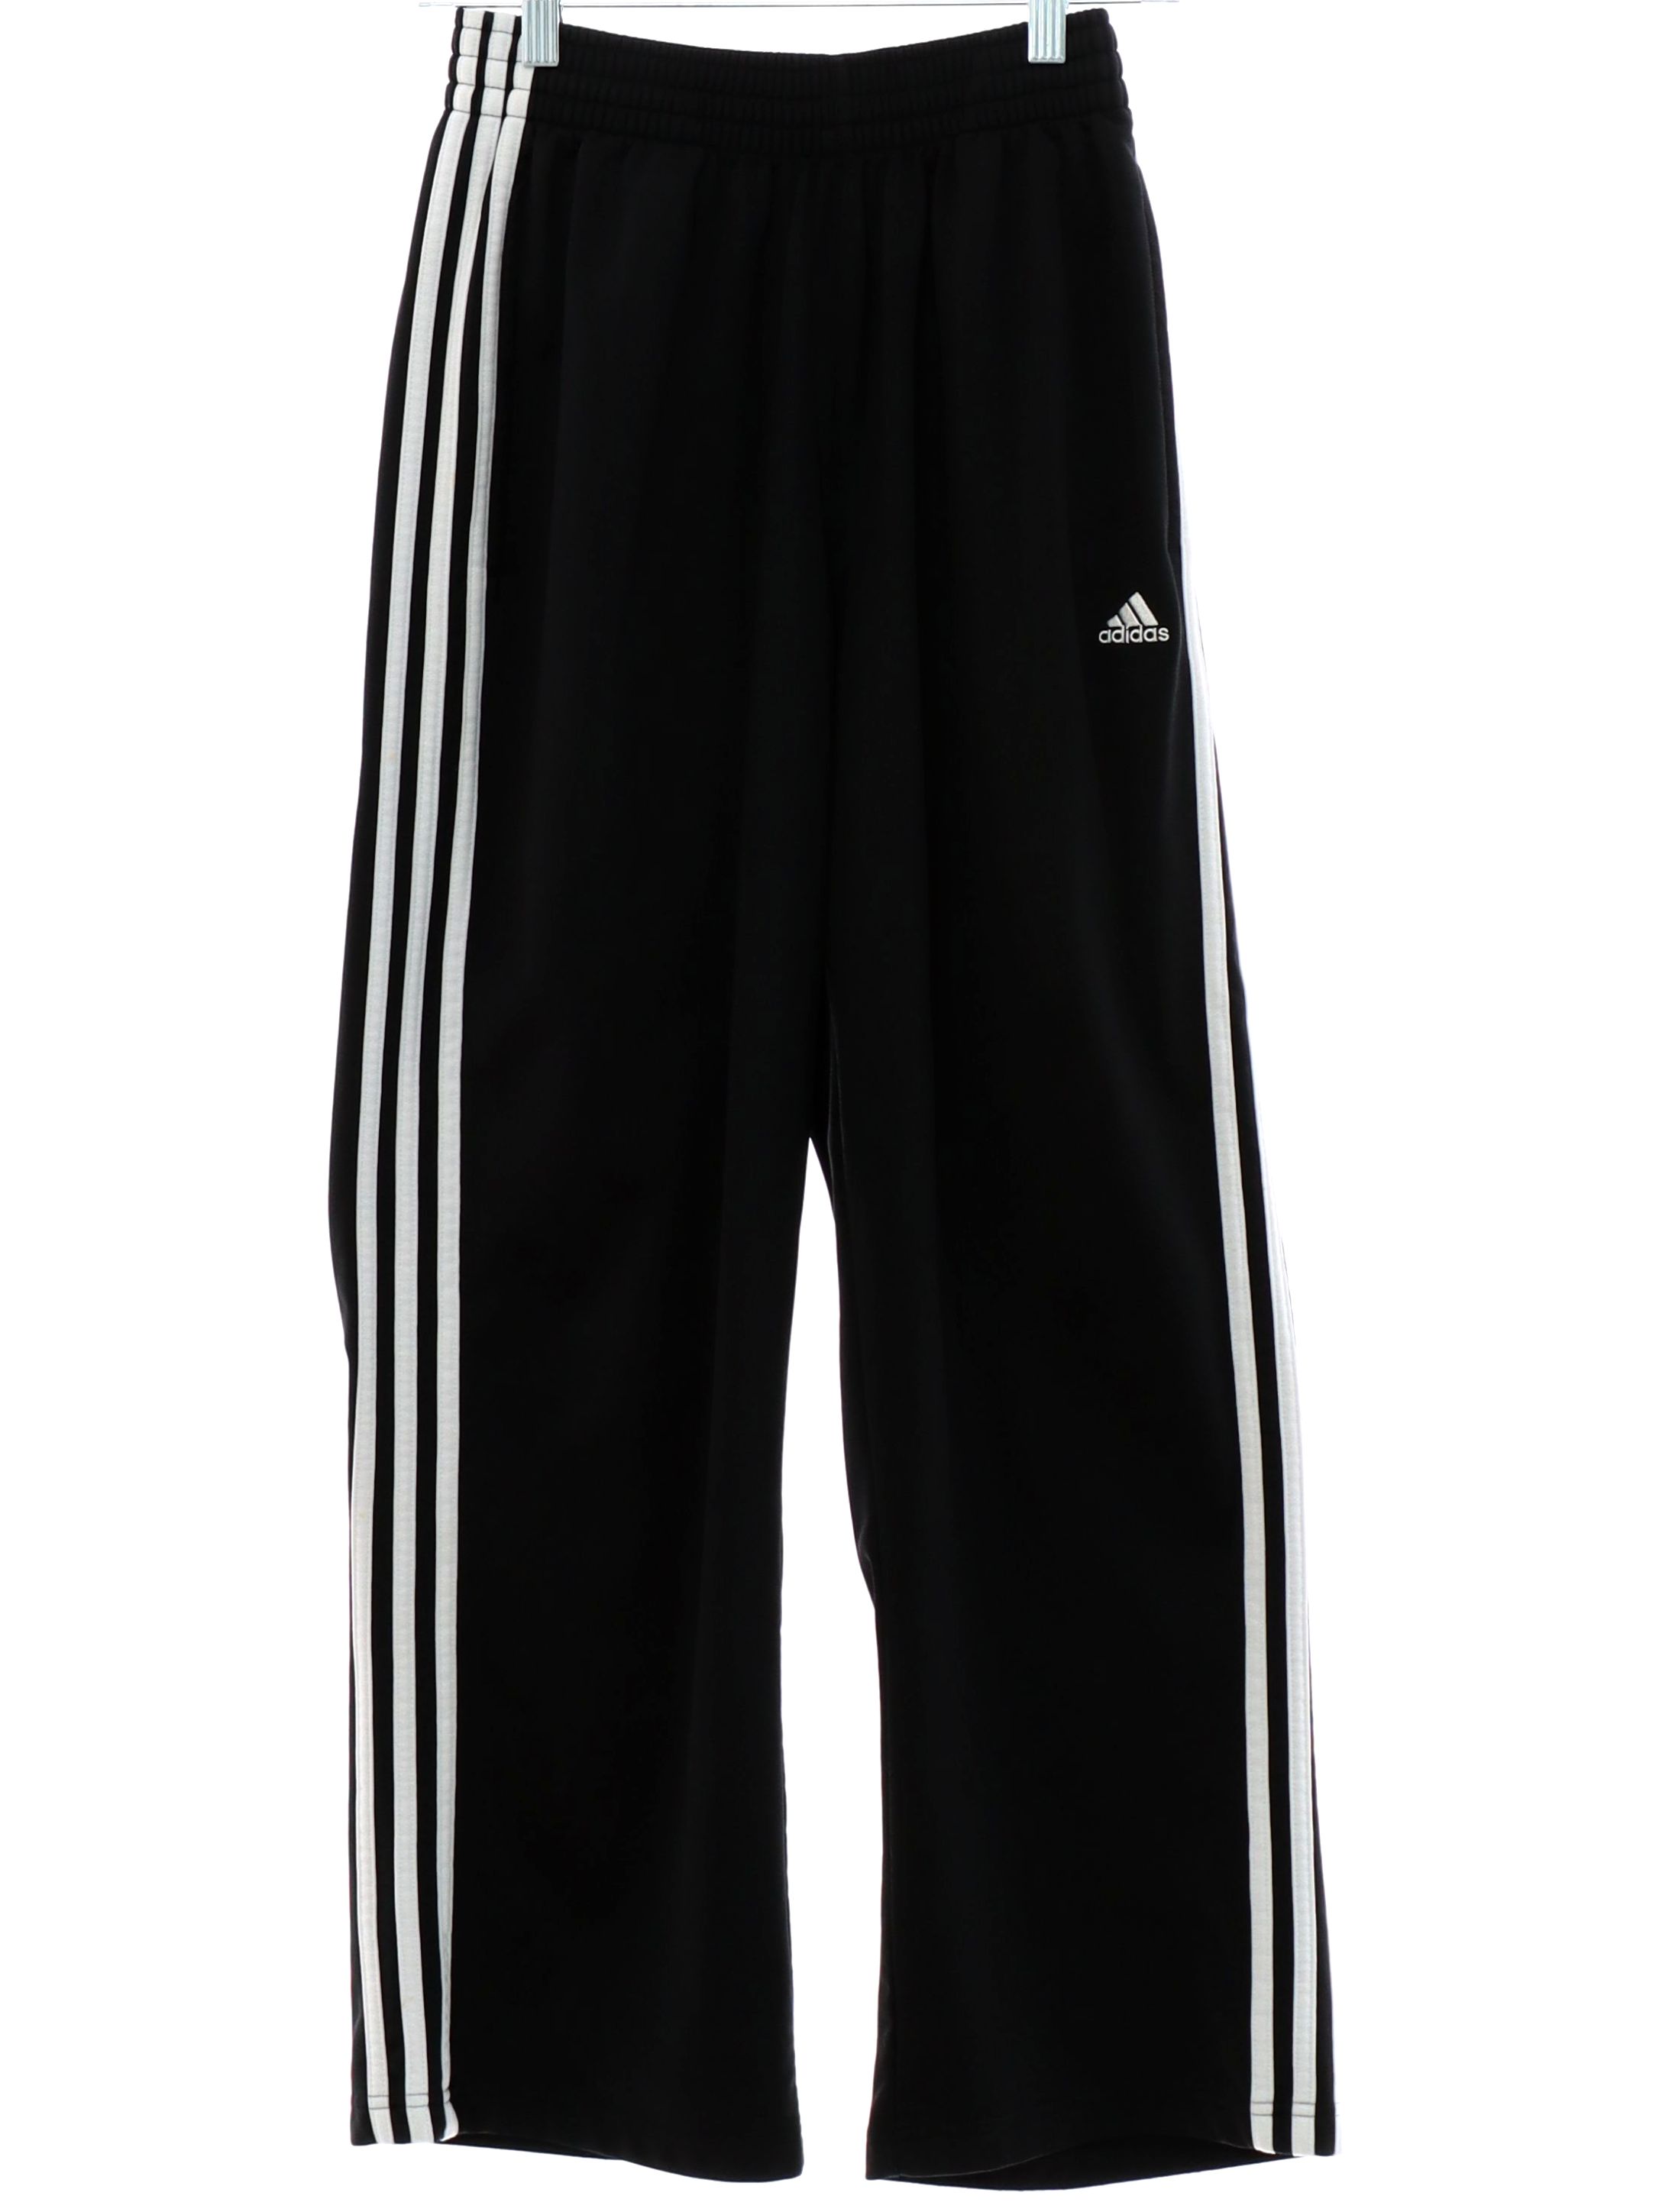 Pants: 90s -Adidas- Unisex black lightweight polyester flat front track pants with cuffless hem, vertical inset side entry front pockets, no rear pockets, elastic waistline with inside drawstring, no belt loops.